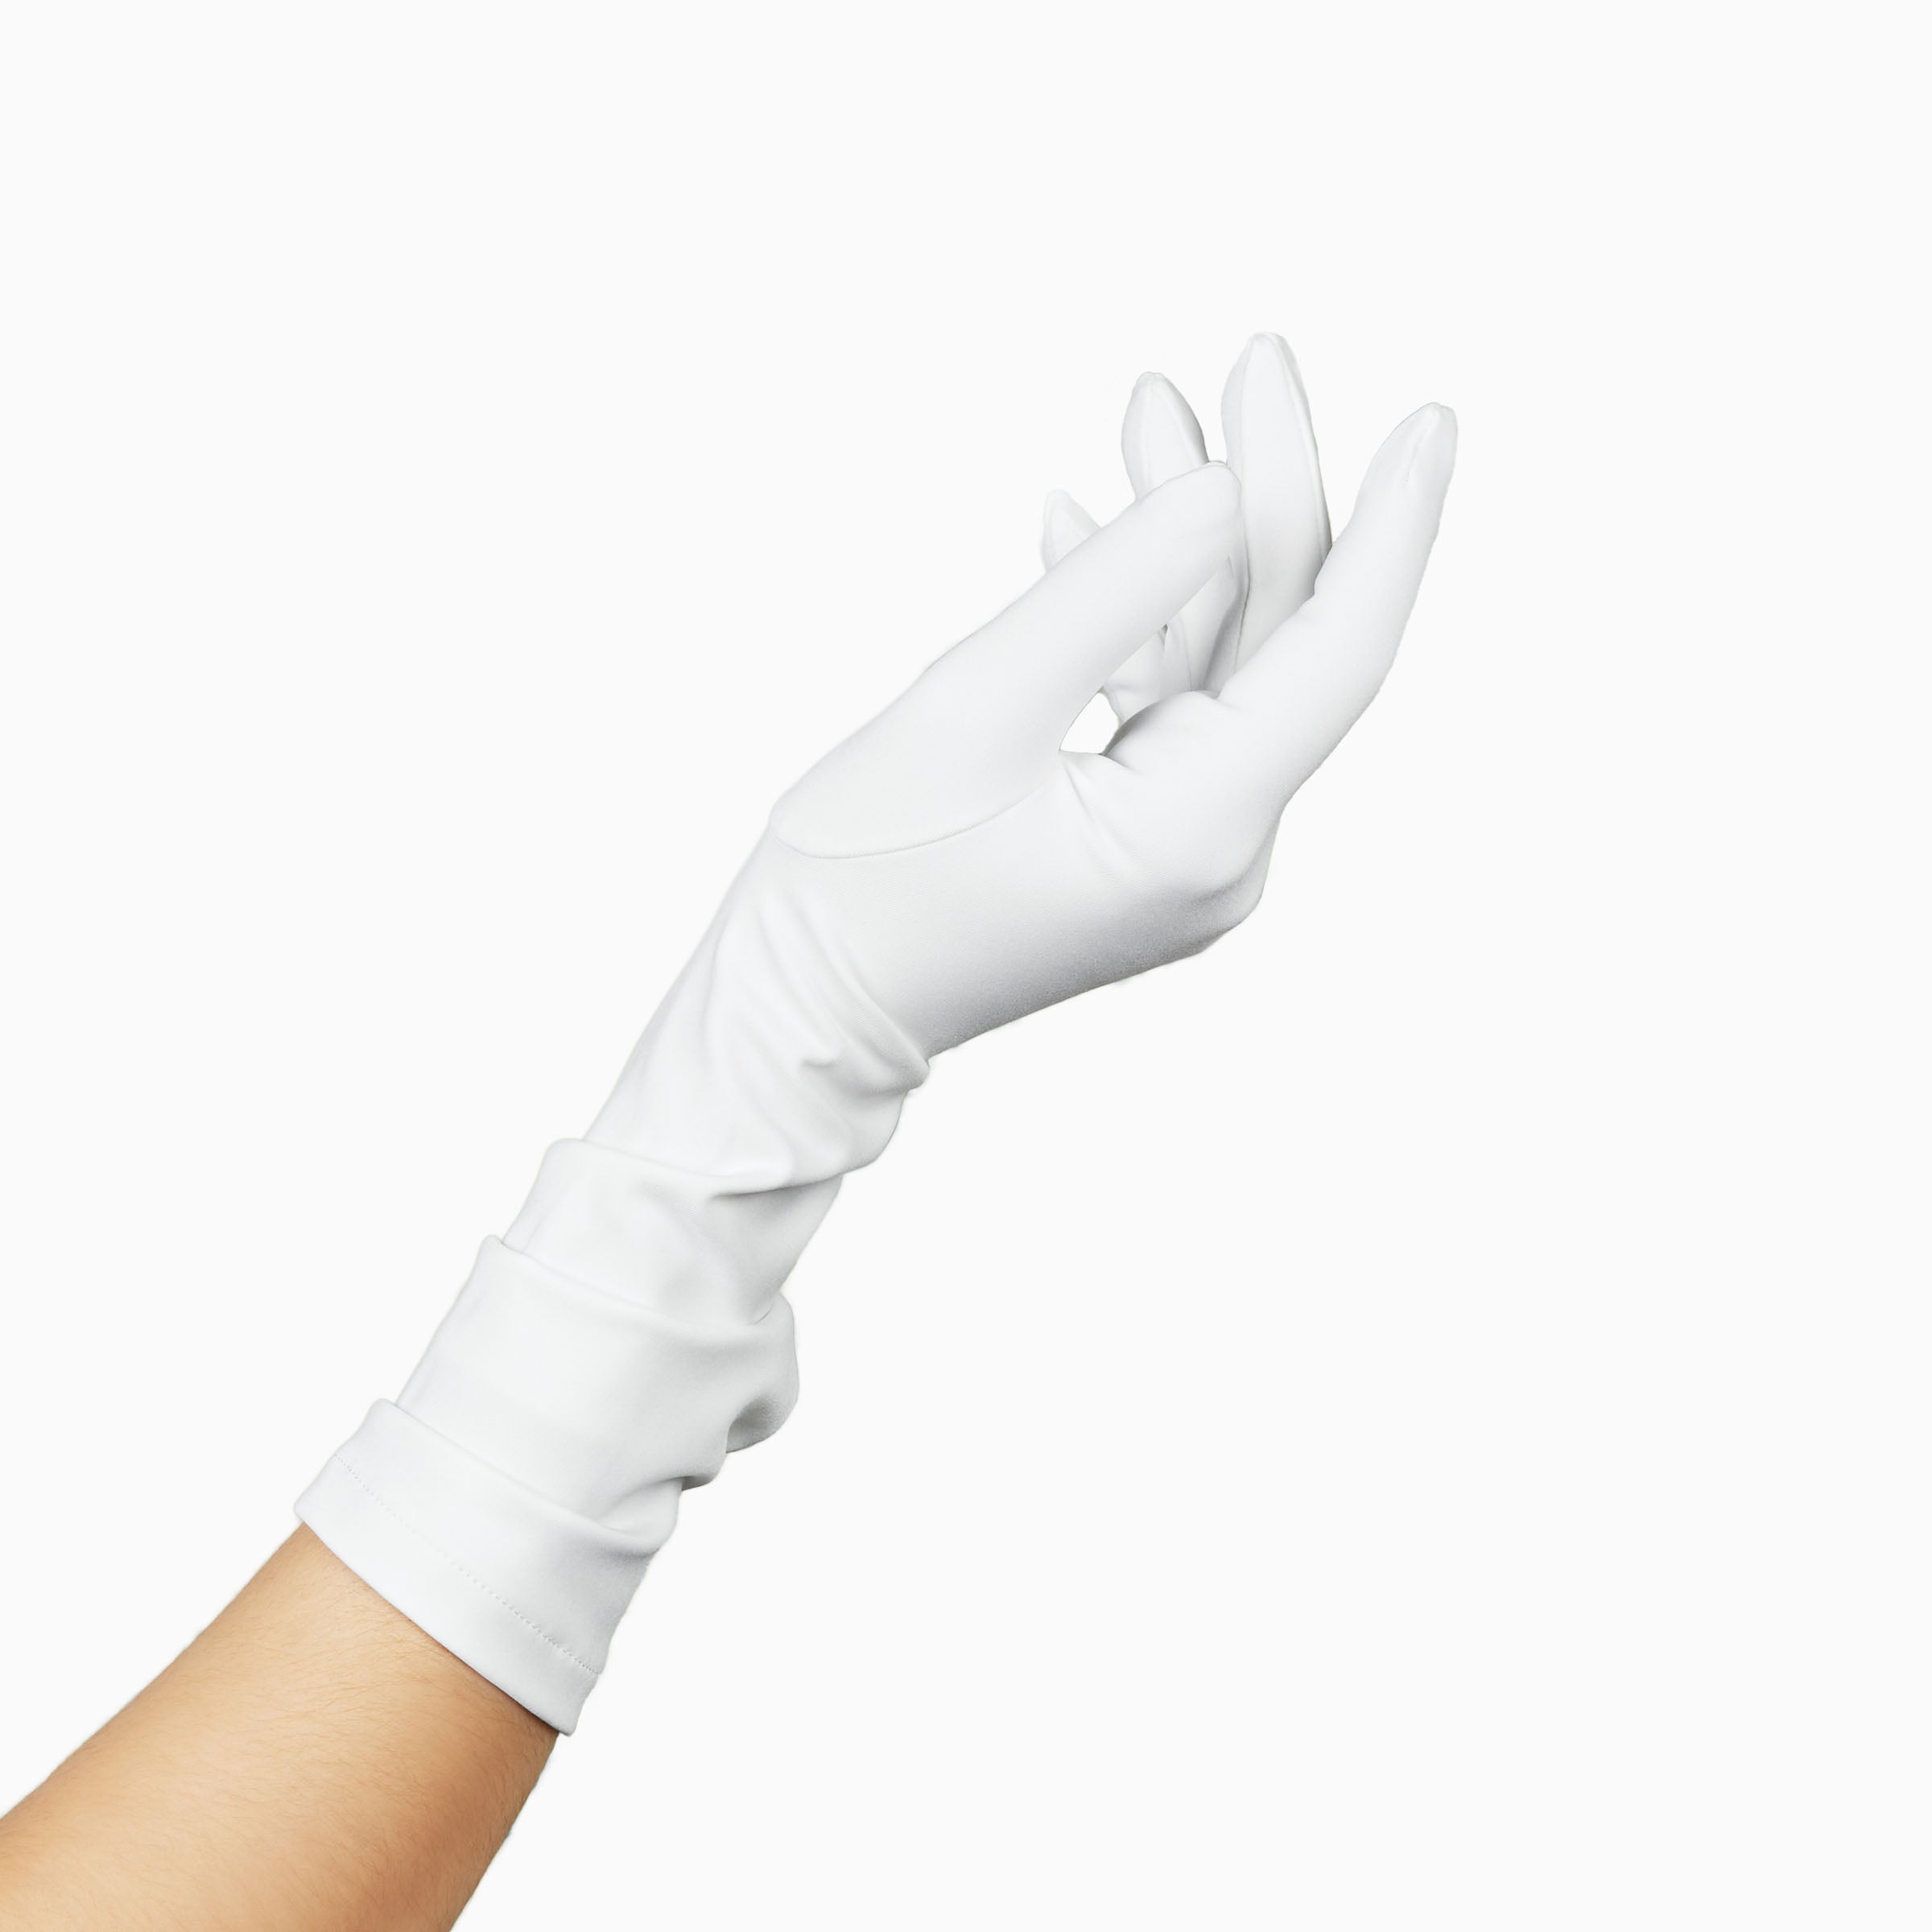 THE JILL mid length glove in white.